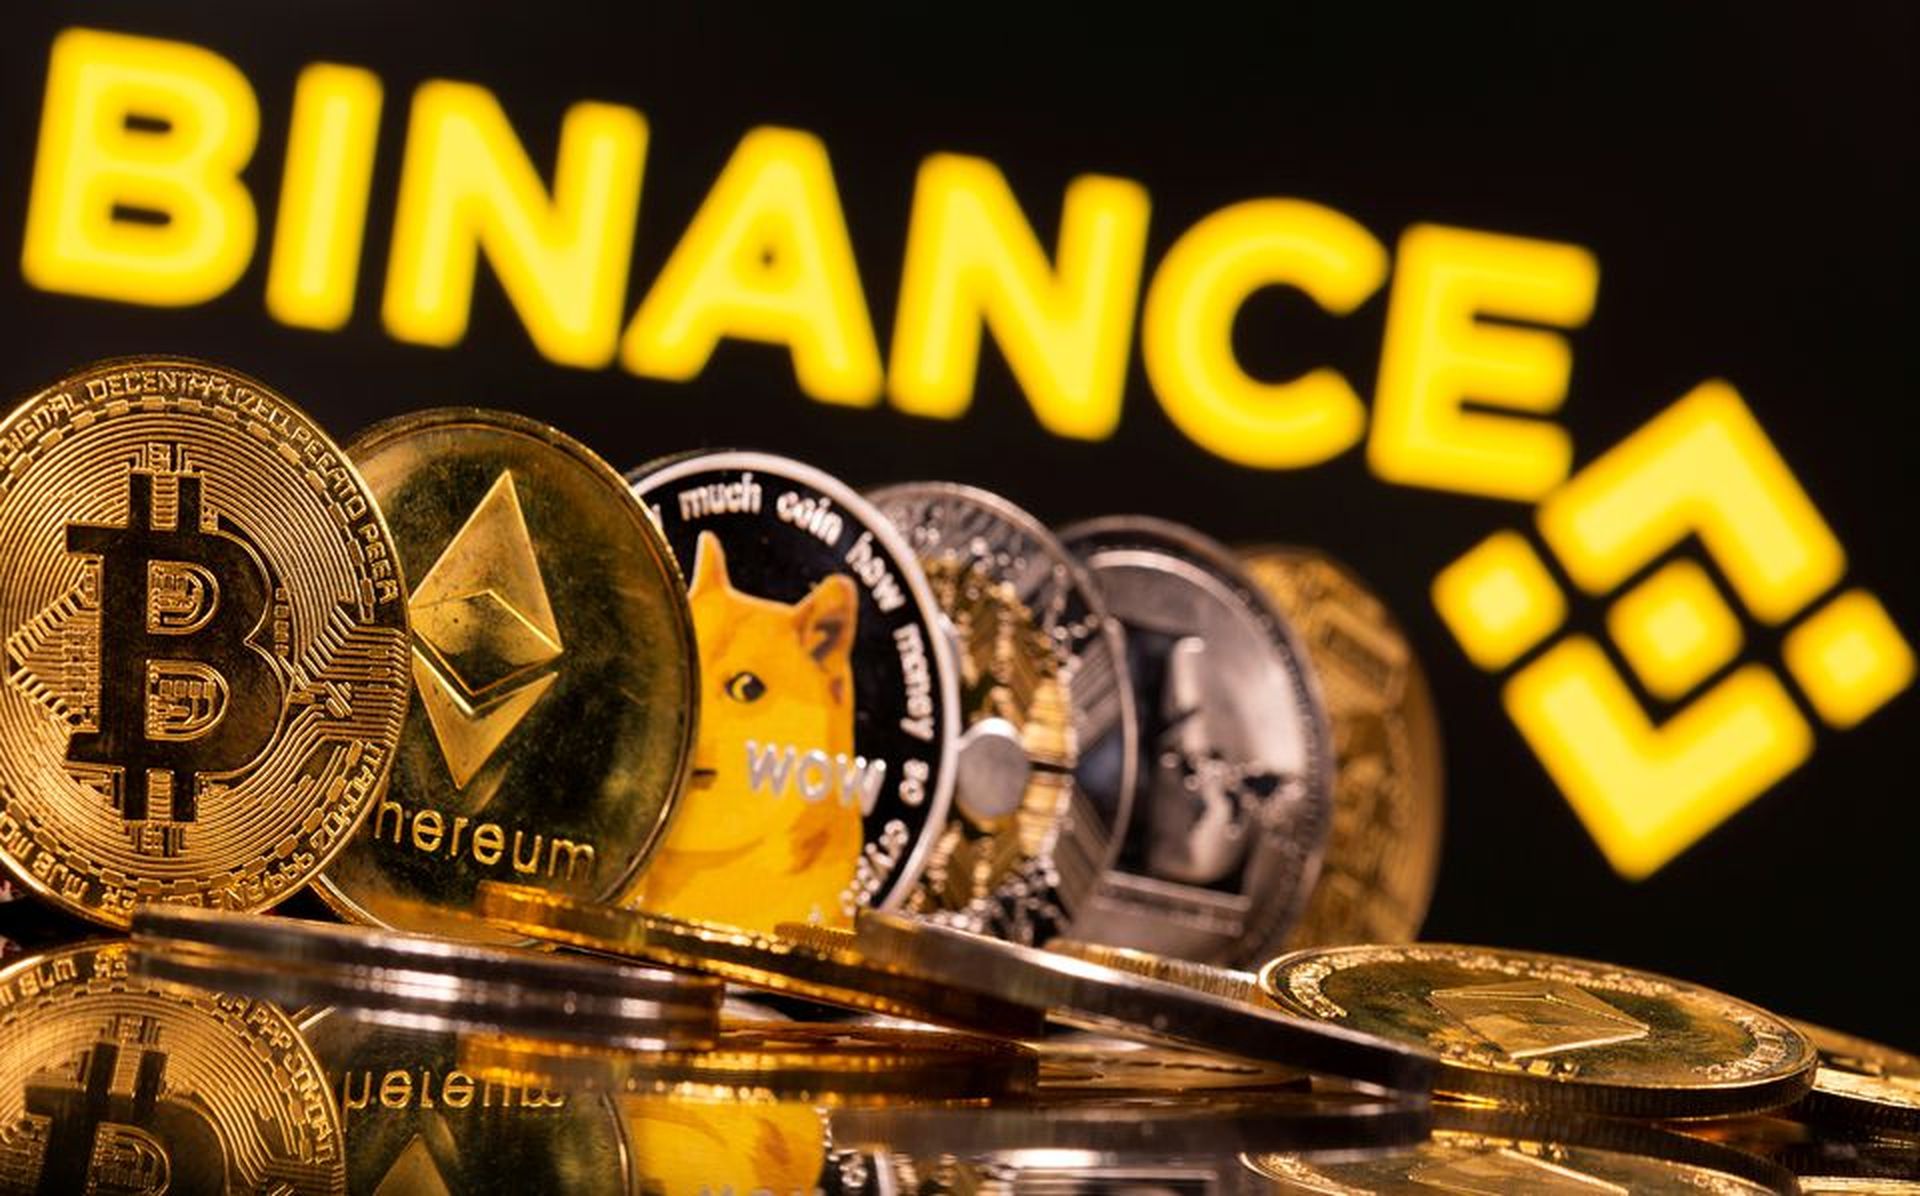 Today, we are here to show you the Binance Crypto WODL answers (September 26). If you find the correct cryptocurrency term in the Binance news, you might win...